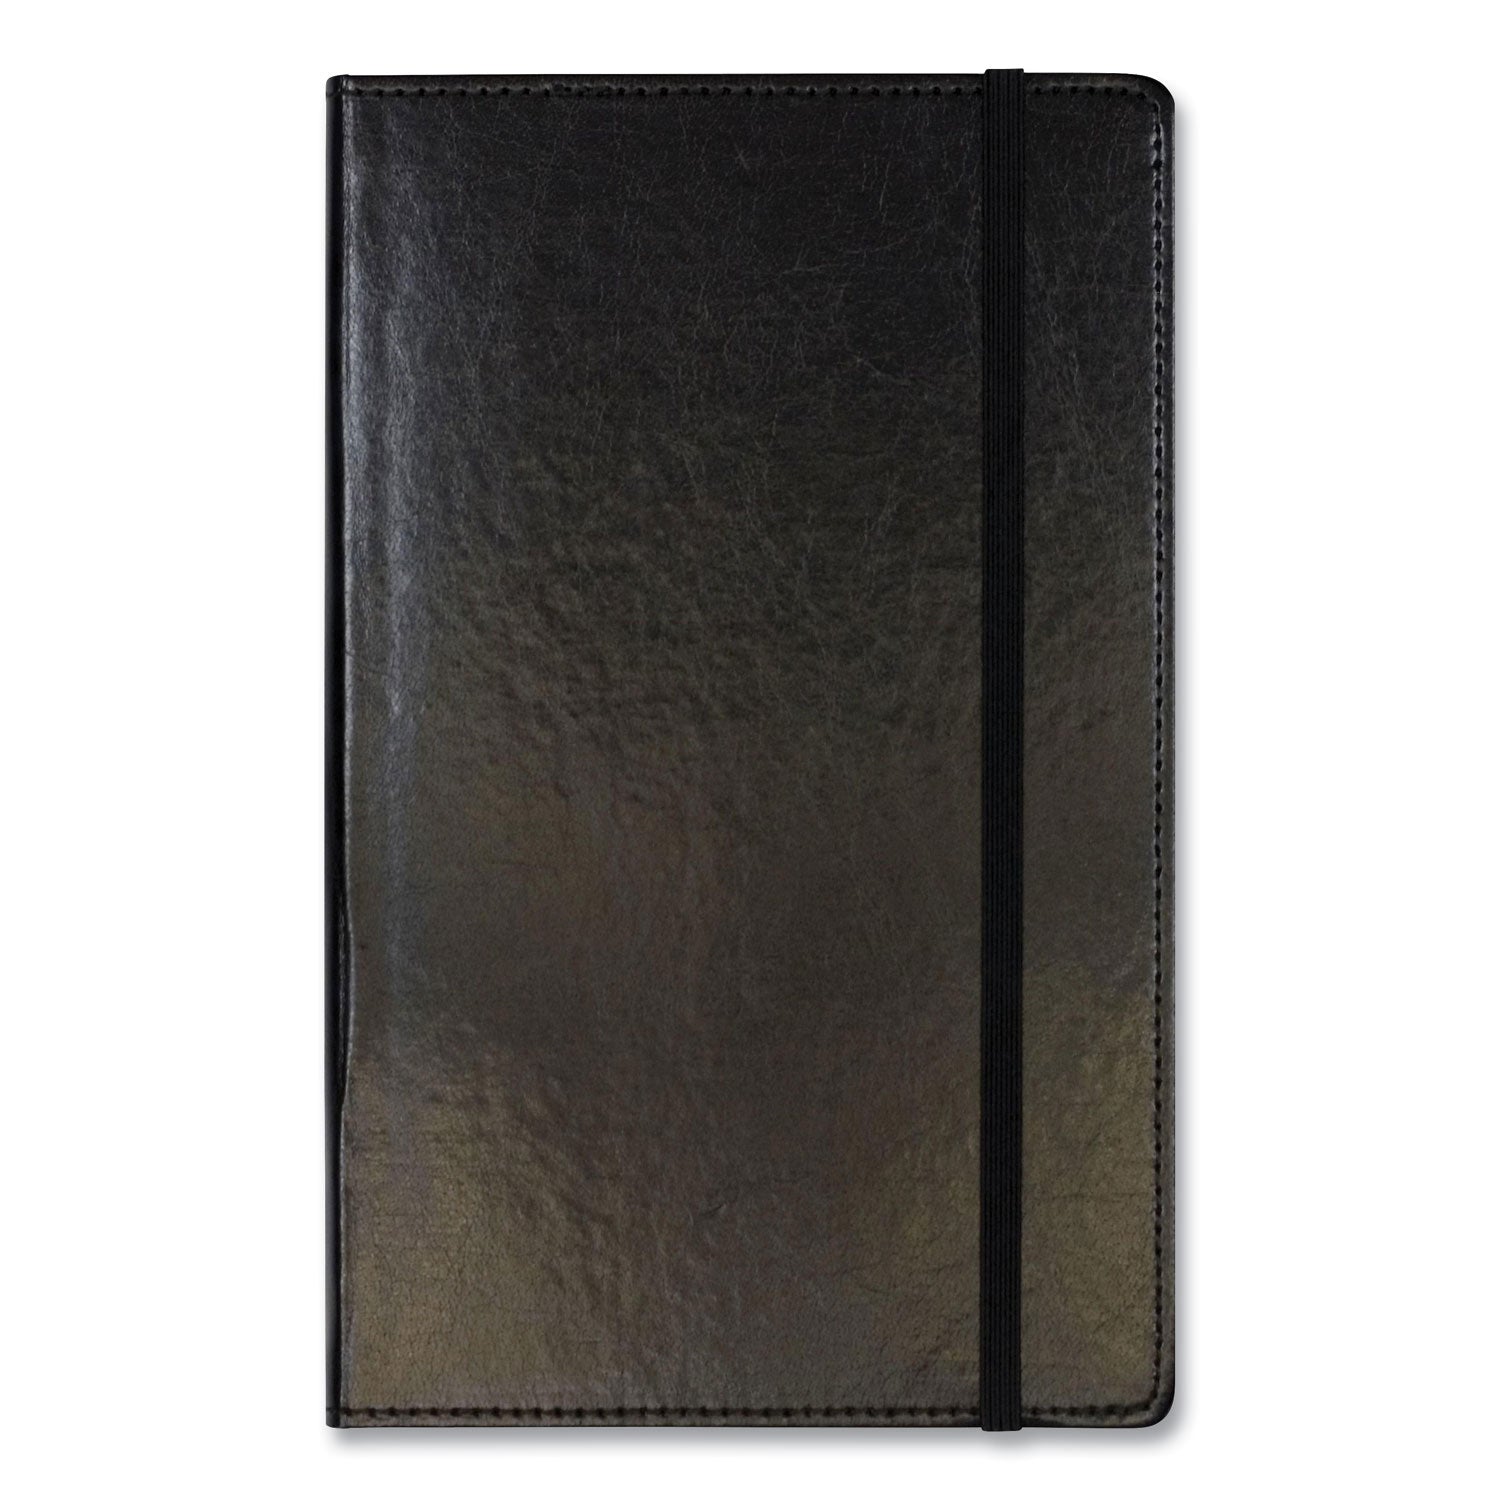 bonded-leather-journal-1-subject-narrow-rule-black-cover-240-825-x-5-sheets_cgbmj54791 - 1